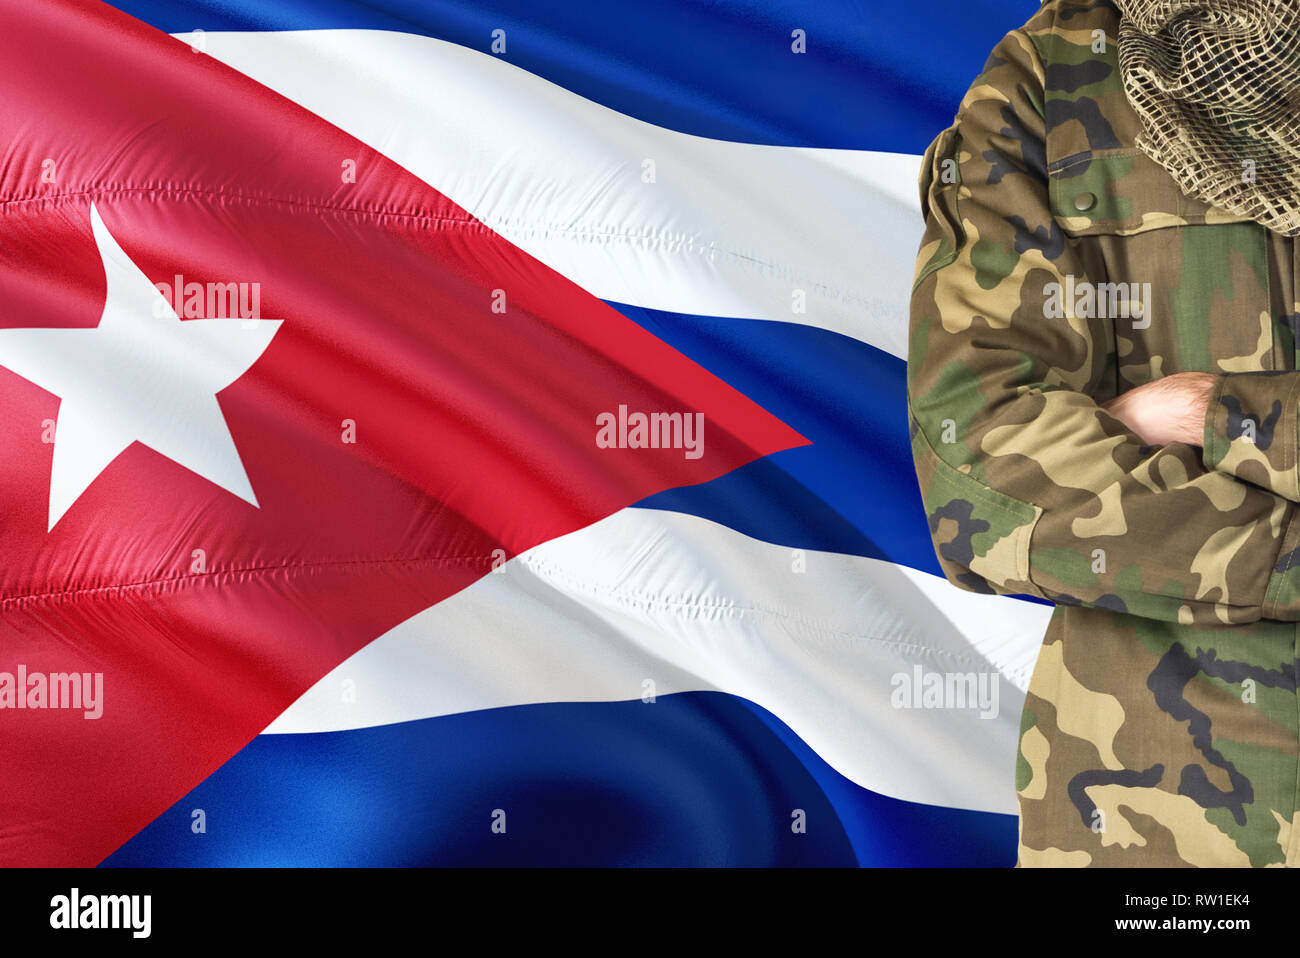 Crossed arms Cuban soldier with national waving flag on background - Cuba Military theme. Stock Photo